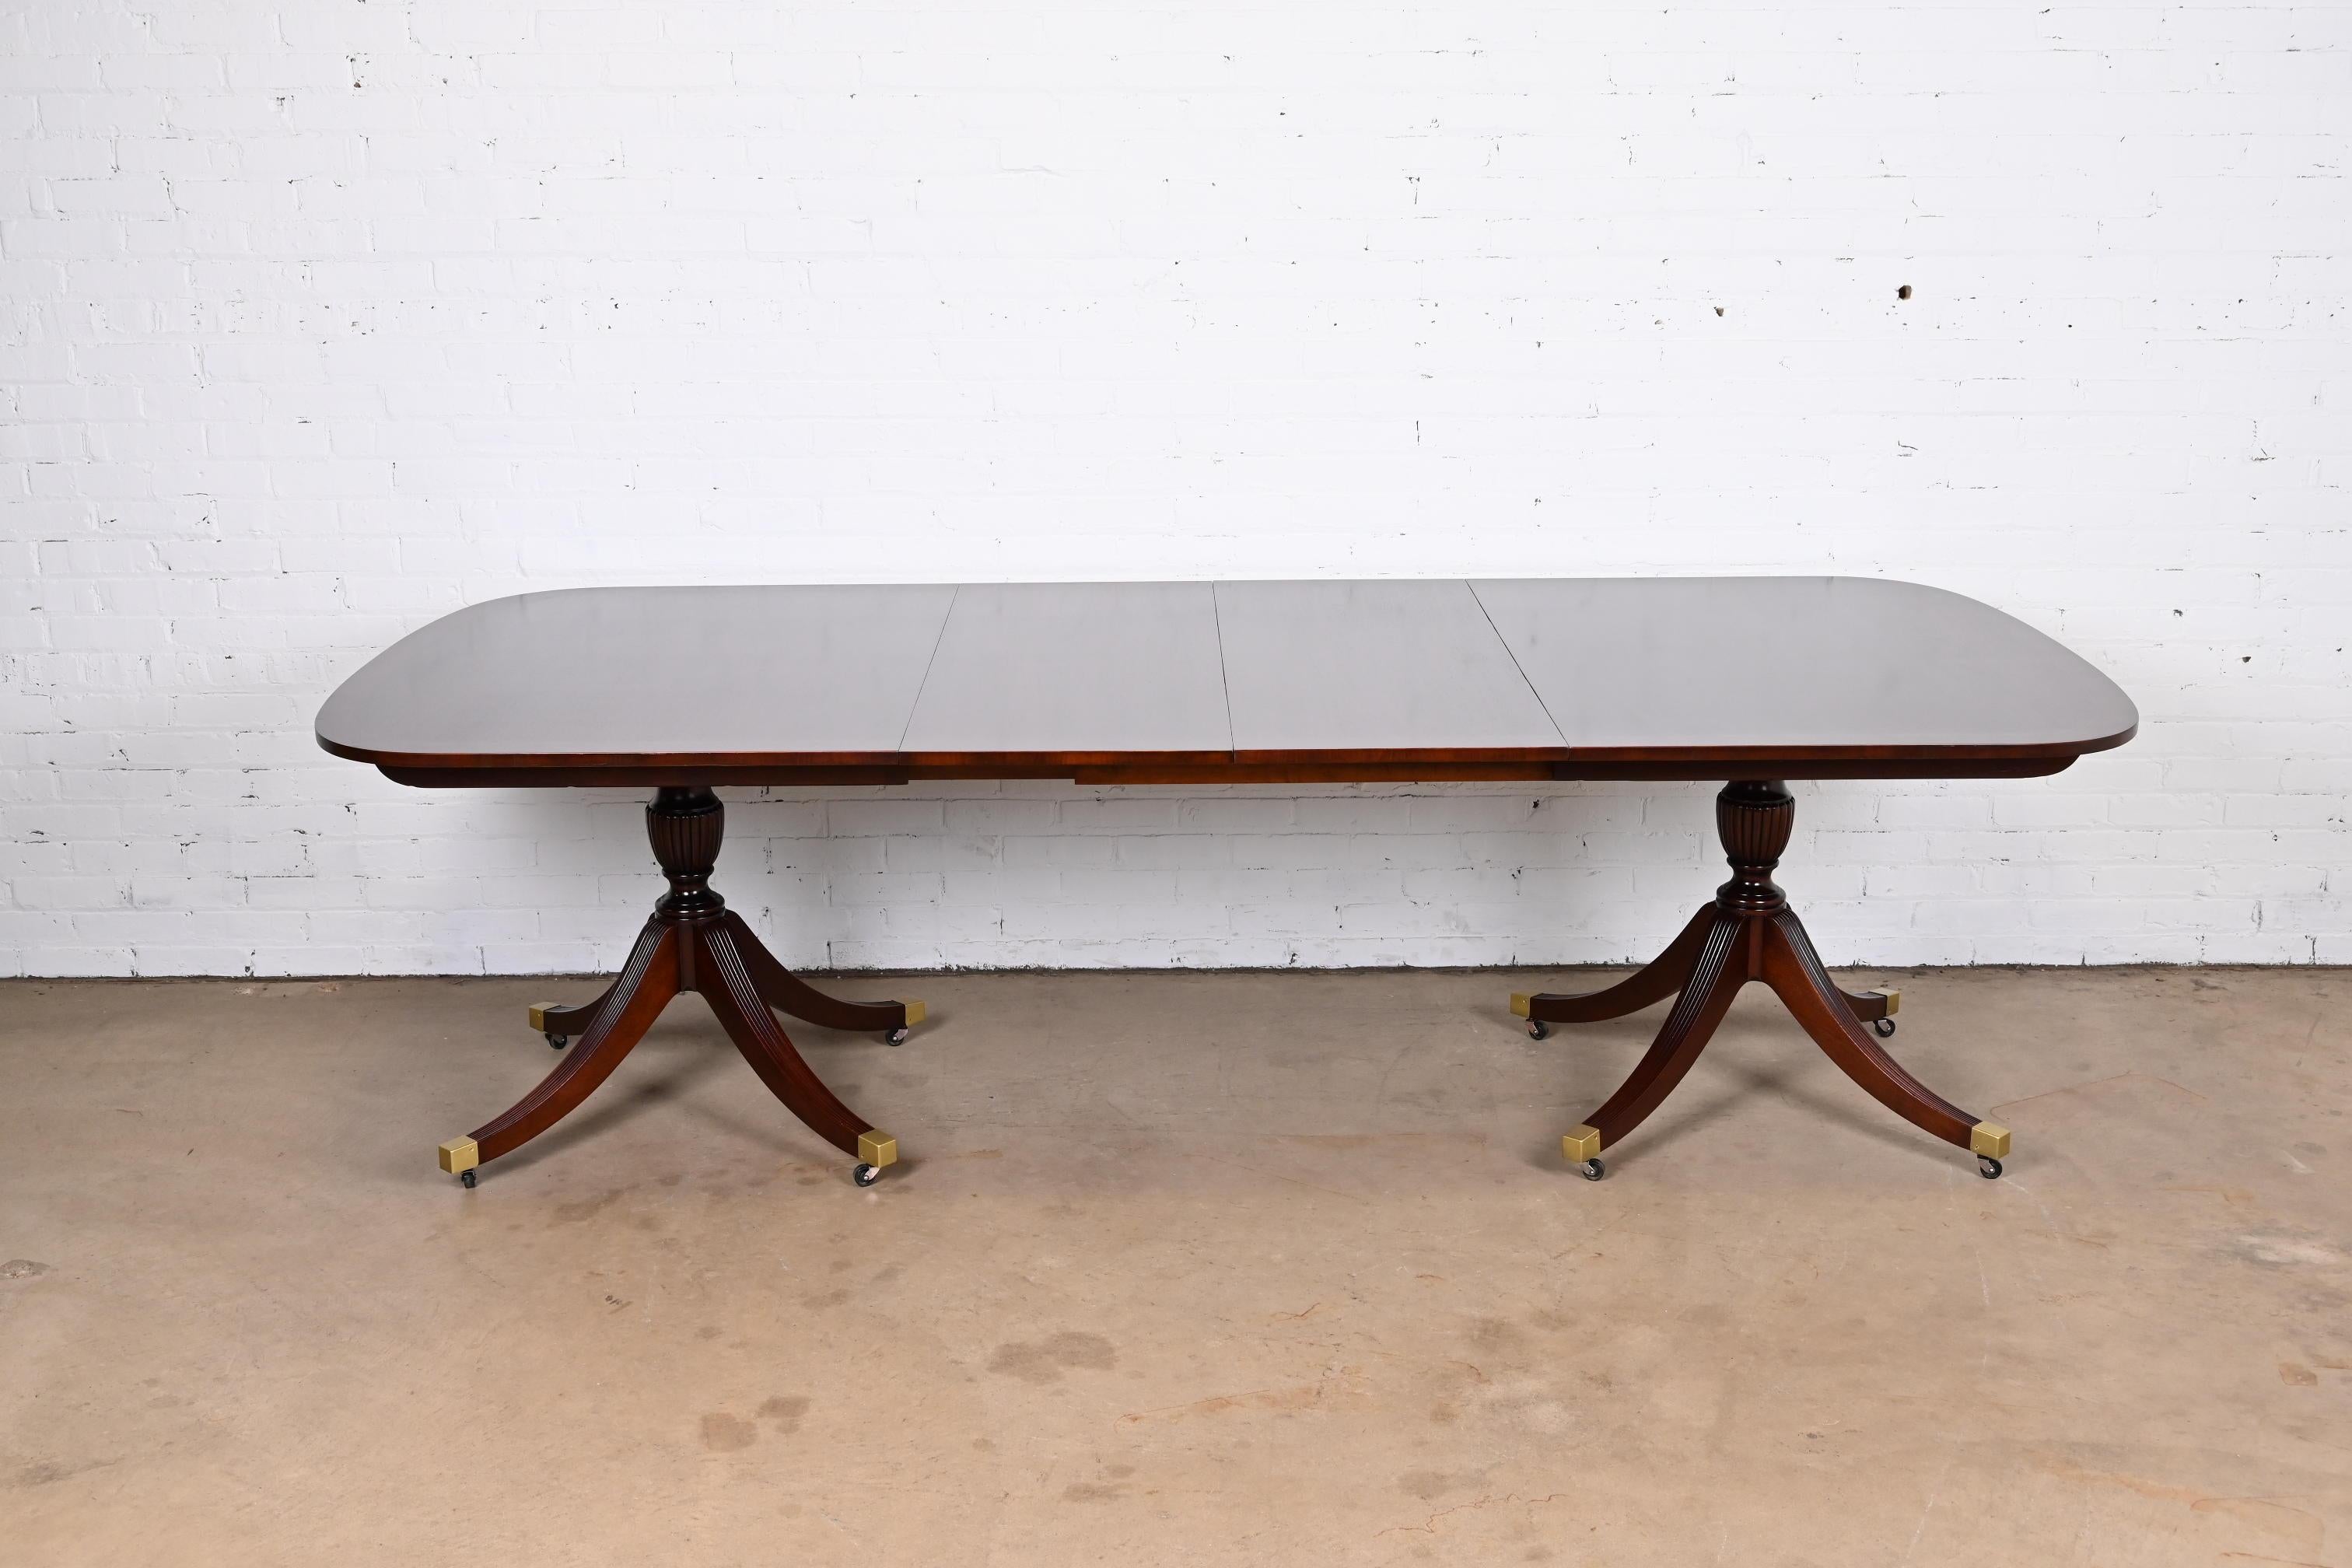 An exceptional Georgian or Regency style double pedestal extension dining table

By Baker Furniture

USA, Circa 1950s

Mahogany, with inlaid satinwood banding, carved solid mahogany pedestals, and brass-capped feet.

Measures: 68